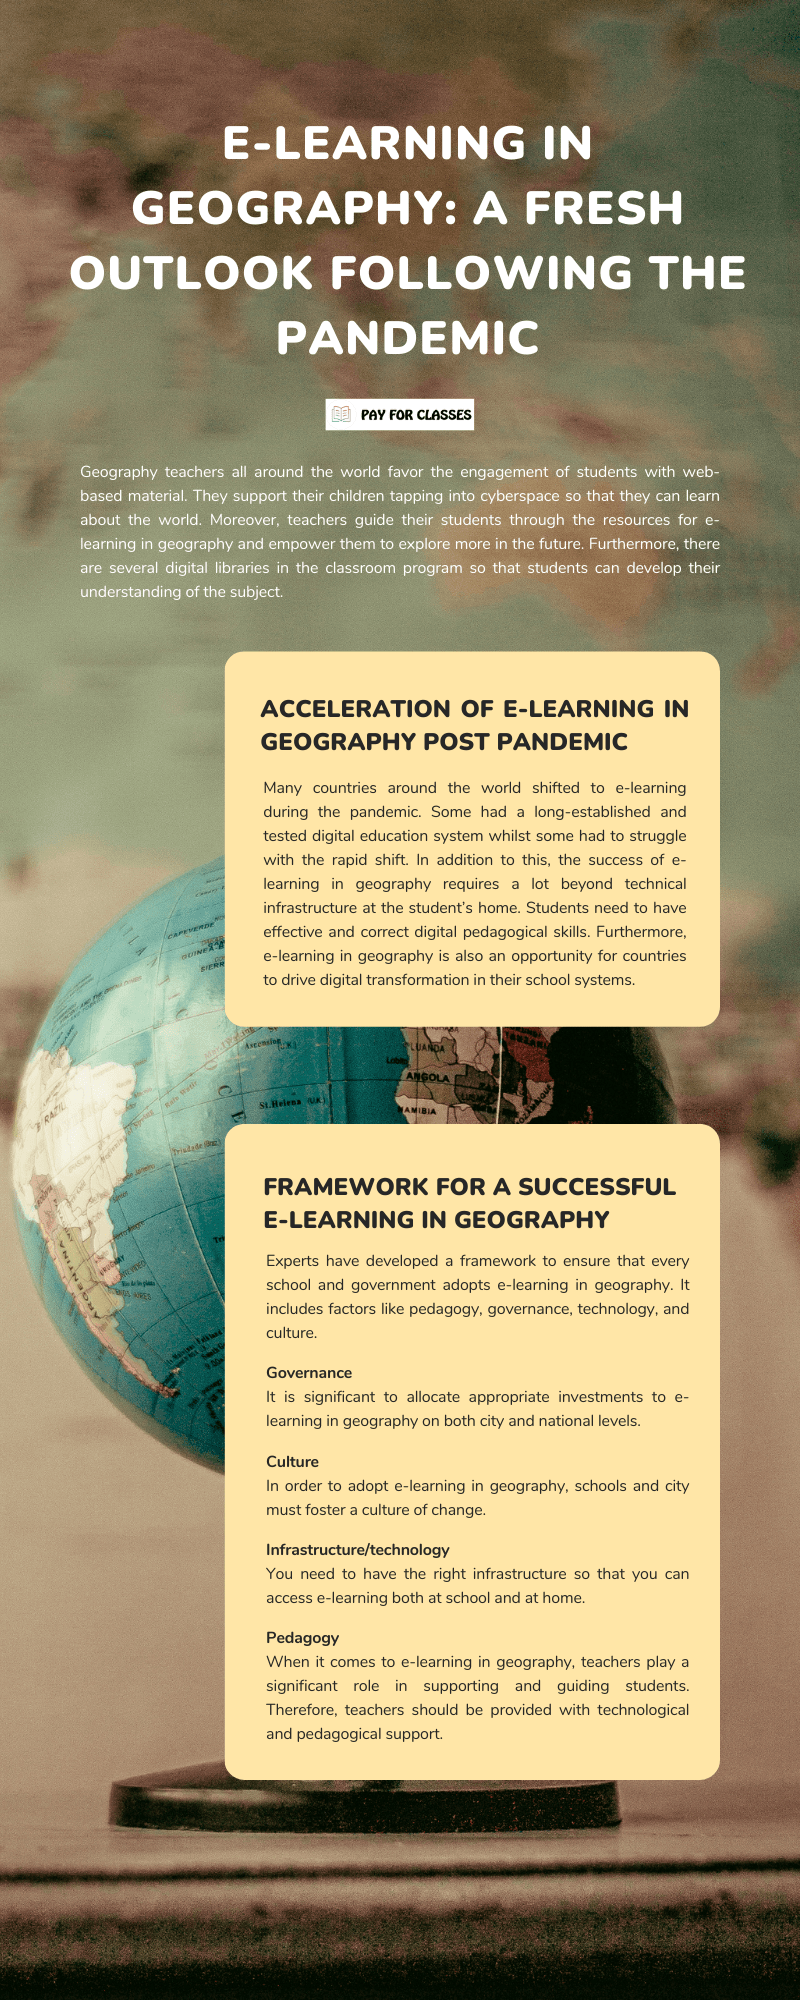 E-Learning-in-Geography-A-Fresh-Outlook-Following-the-Pandemic-2.png 